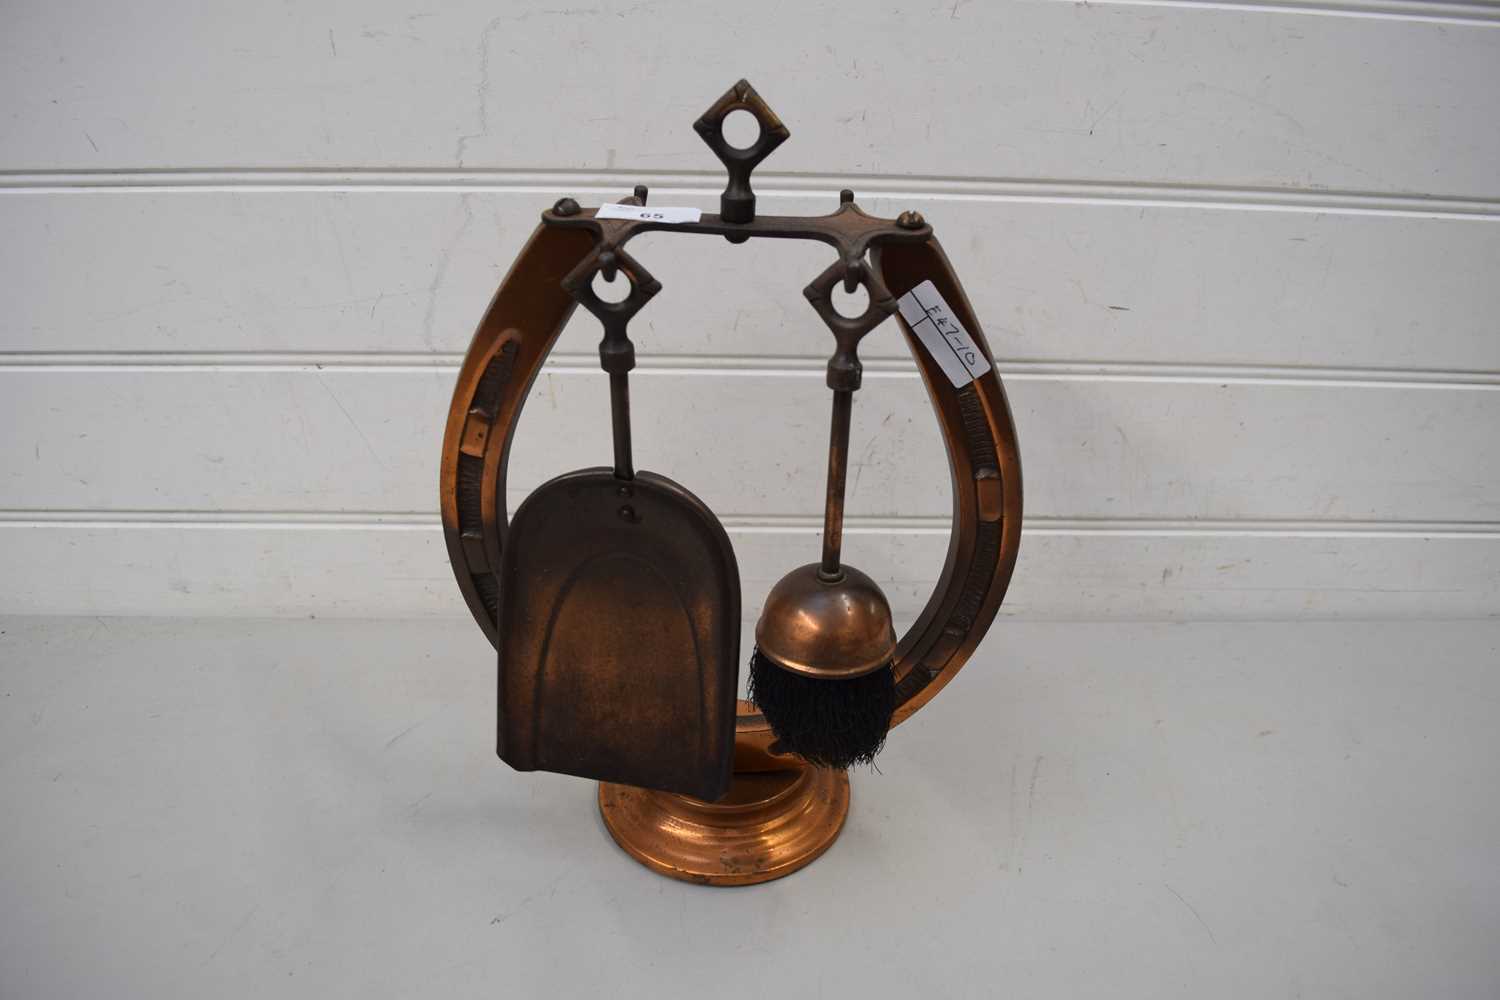 COPPER FIRE TOOL STAND FORMED AS A HORSESHOE